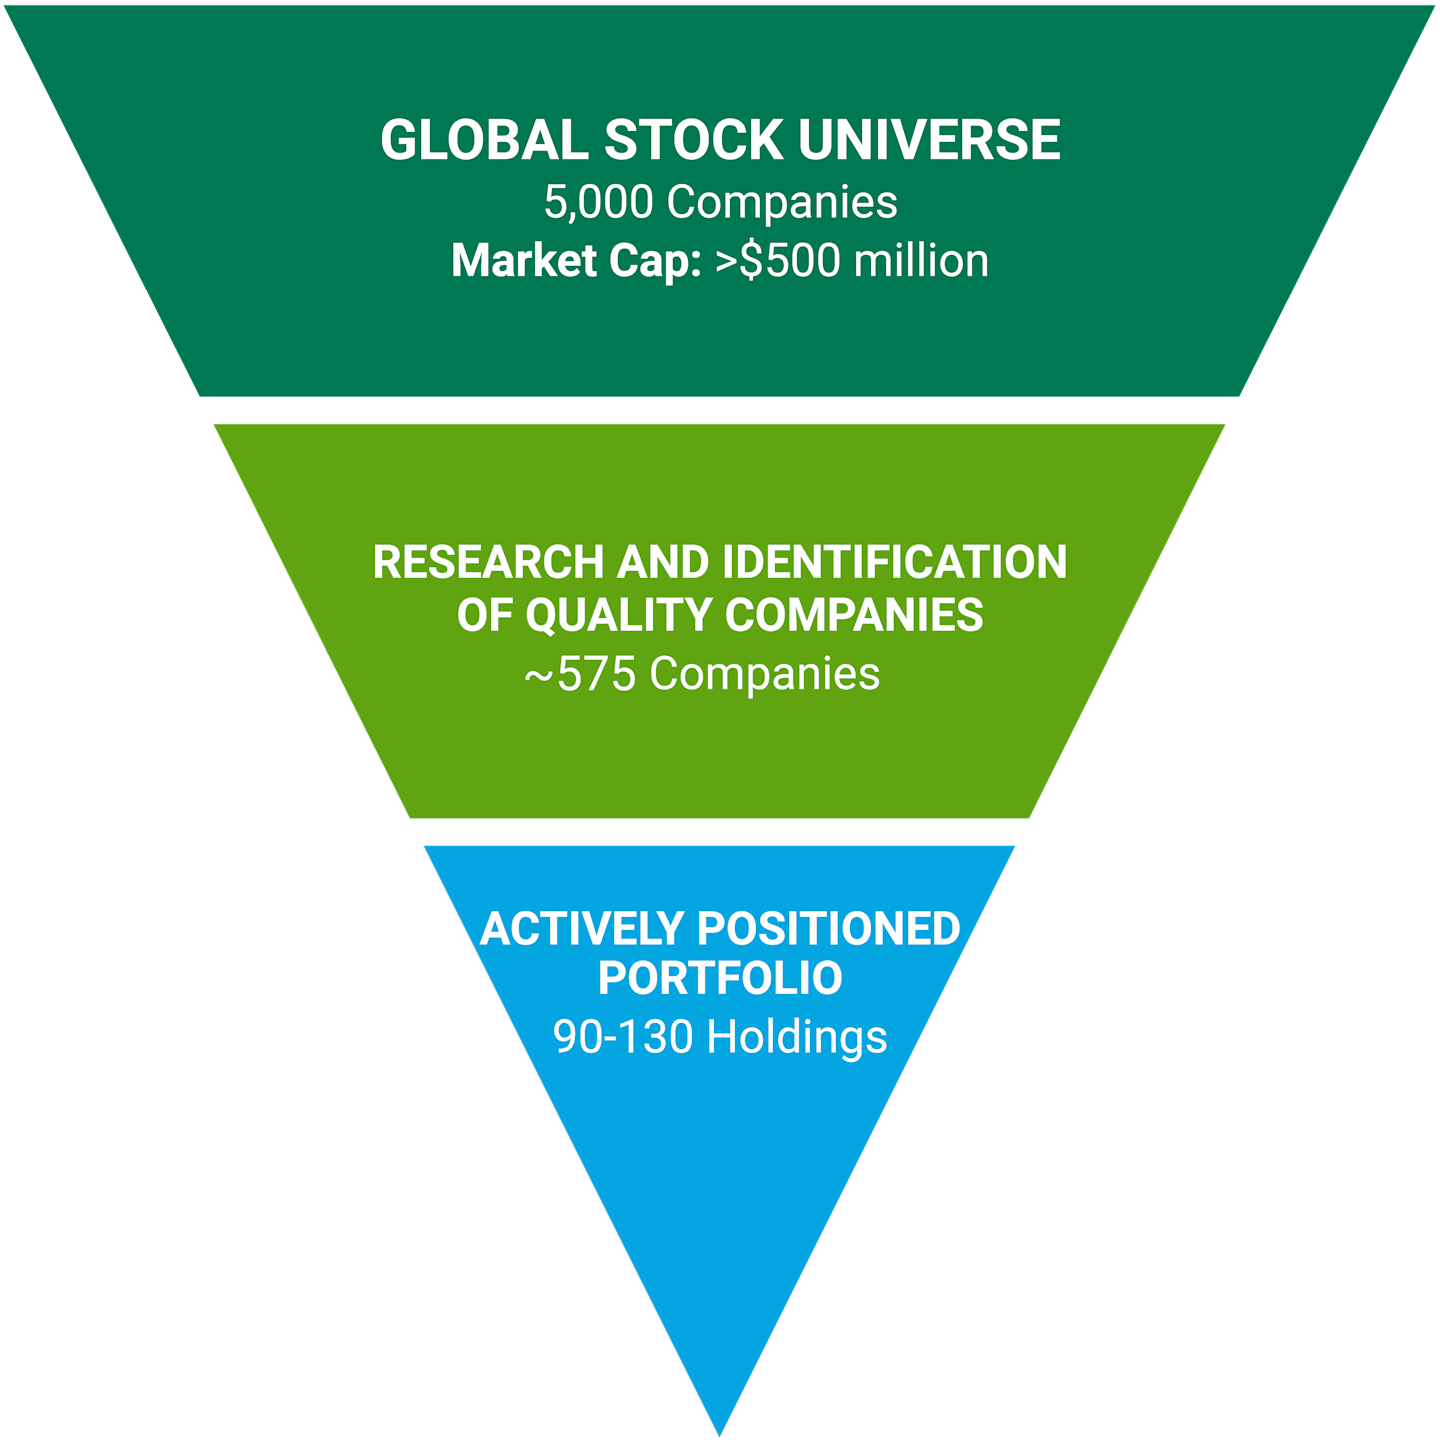 Global Stock Universe: 5,000 companies, Market Cap >$500M. Research and Identification of Quality Companies: 550 companies. Actively Positioned Portfolio: 90-130 holdings. 